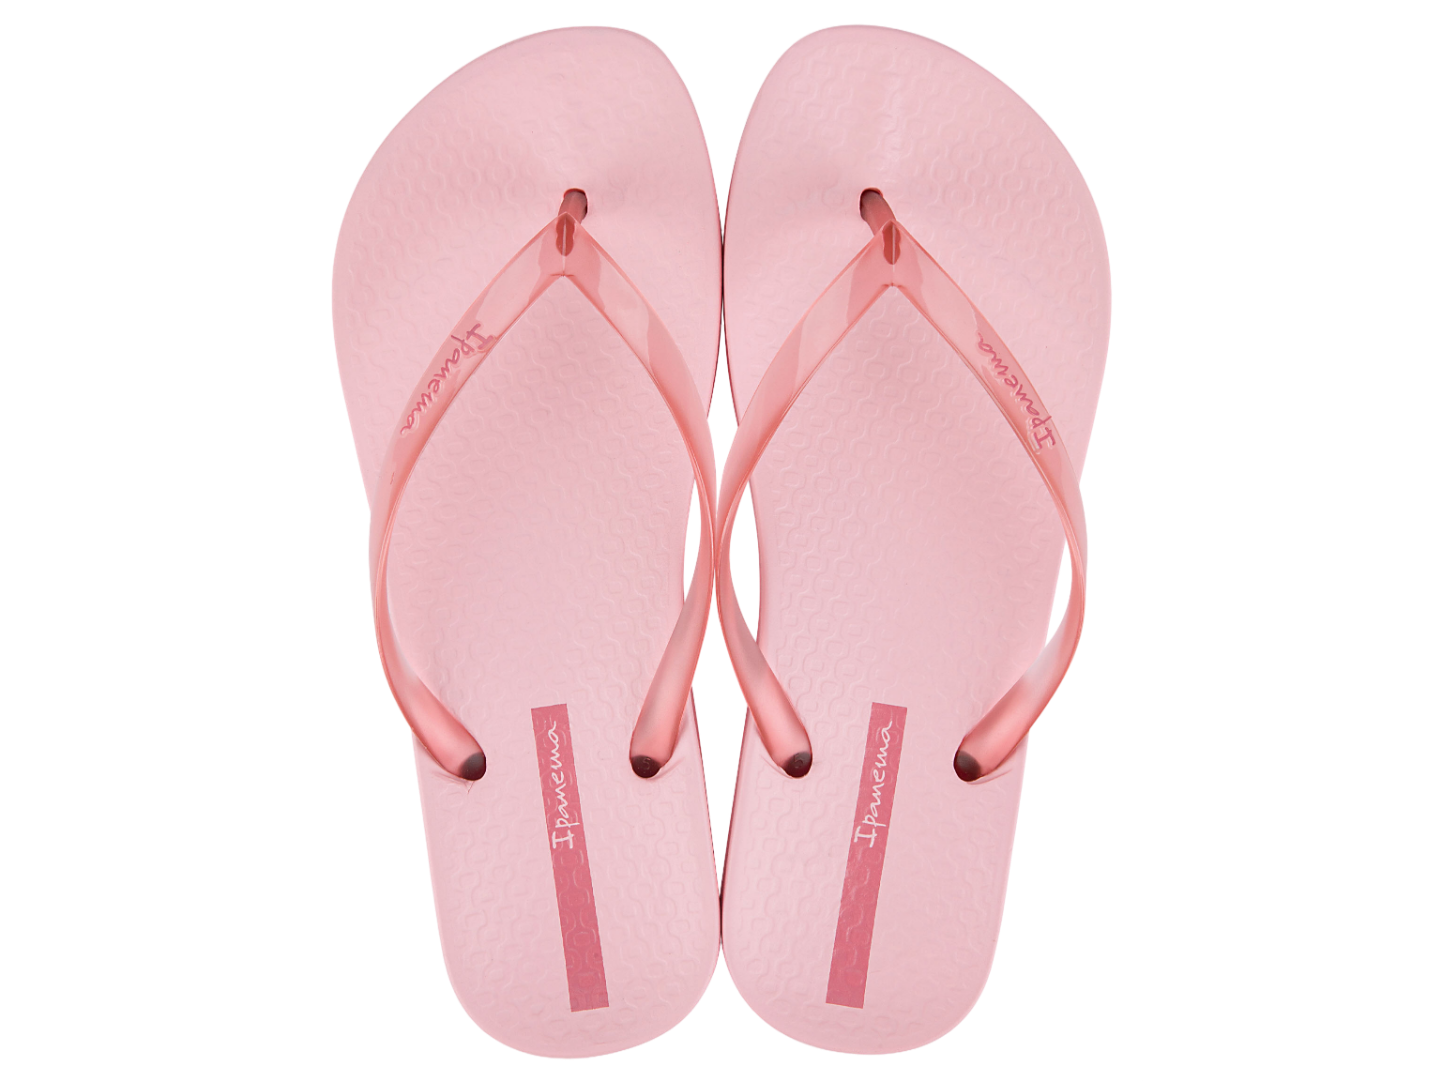 Ipanema Anatomic Connect Slippers Dames - Pink - Maat 41/42